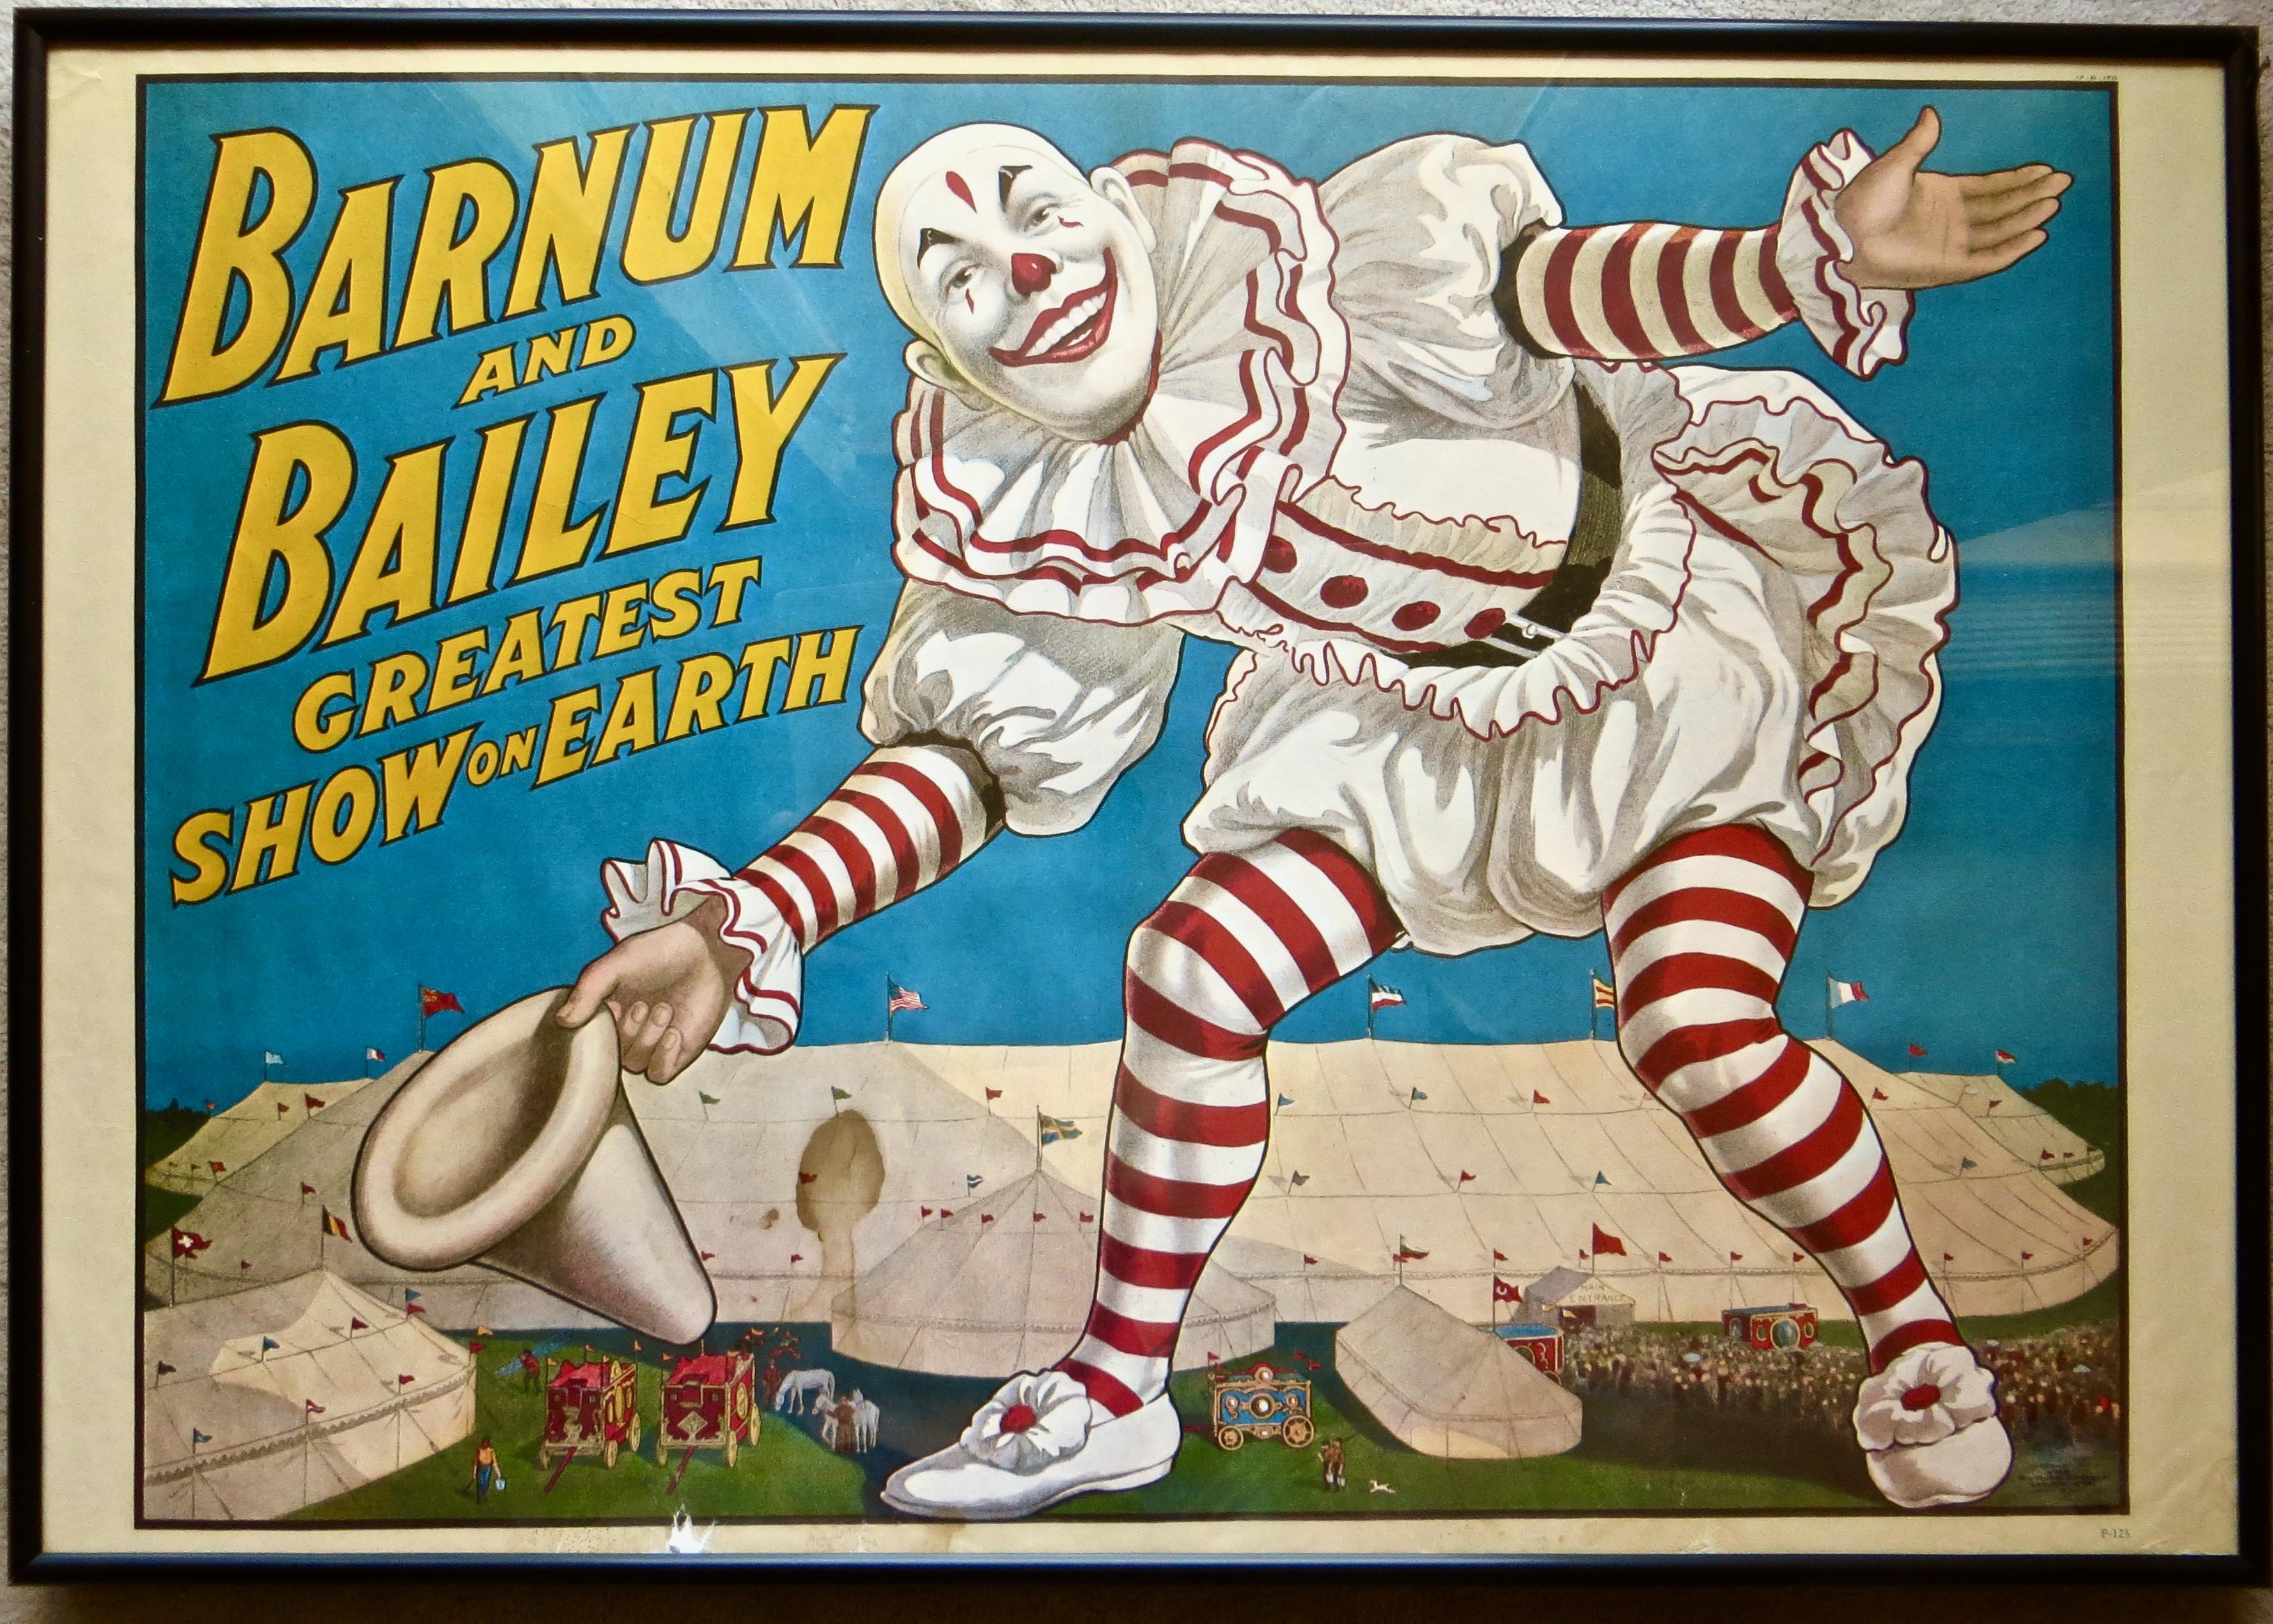 Polychromed Circus Poster by Ringling Bros., circa 1971, 